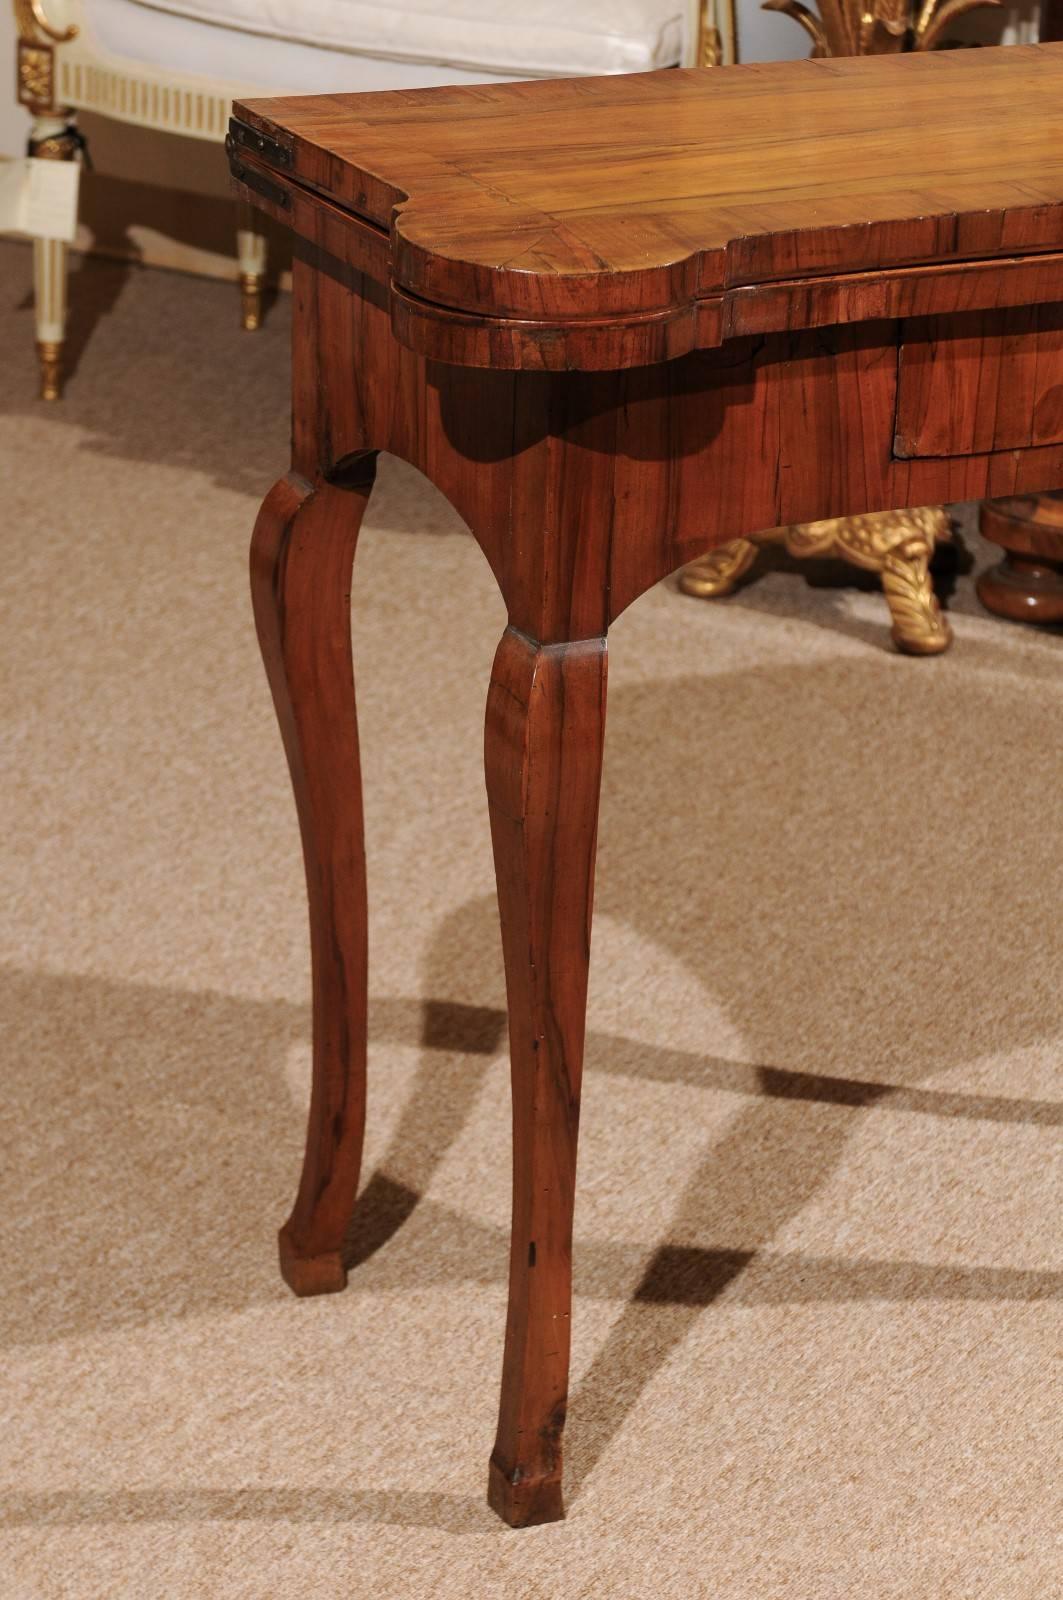 Cross-Banded 18th Century Olivewood Game Table with Drawer, Cabriole Legs and Hoof Feet